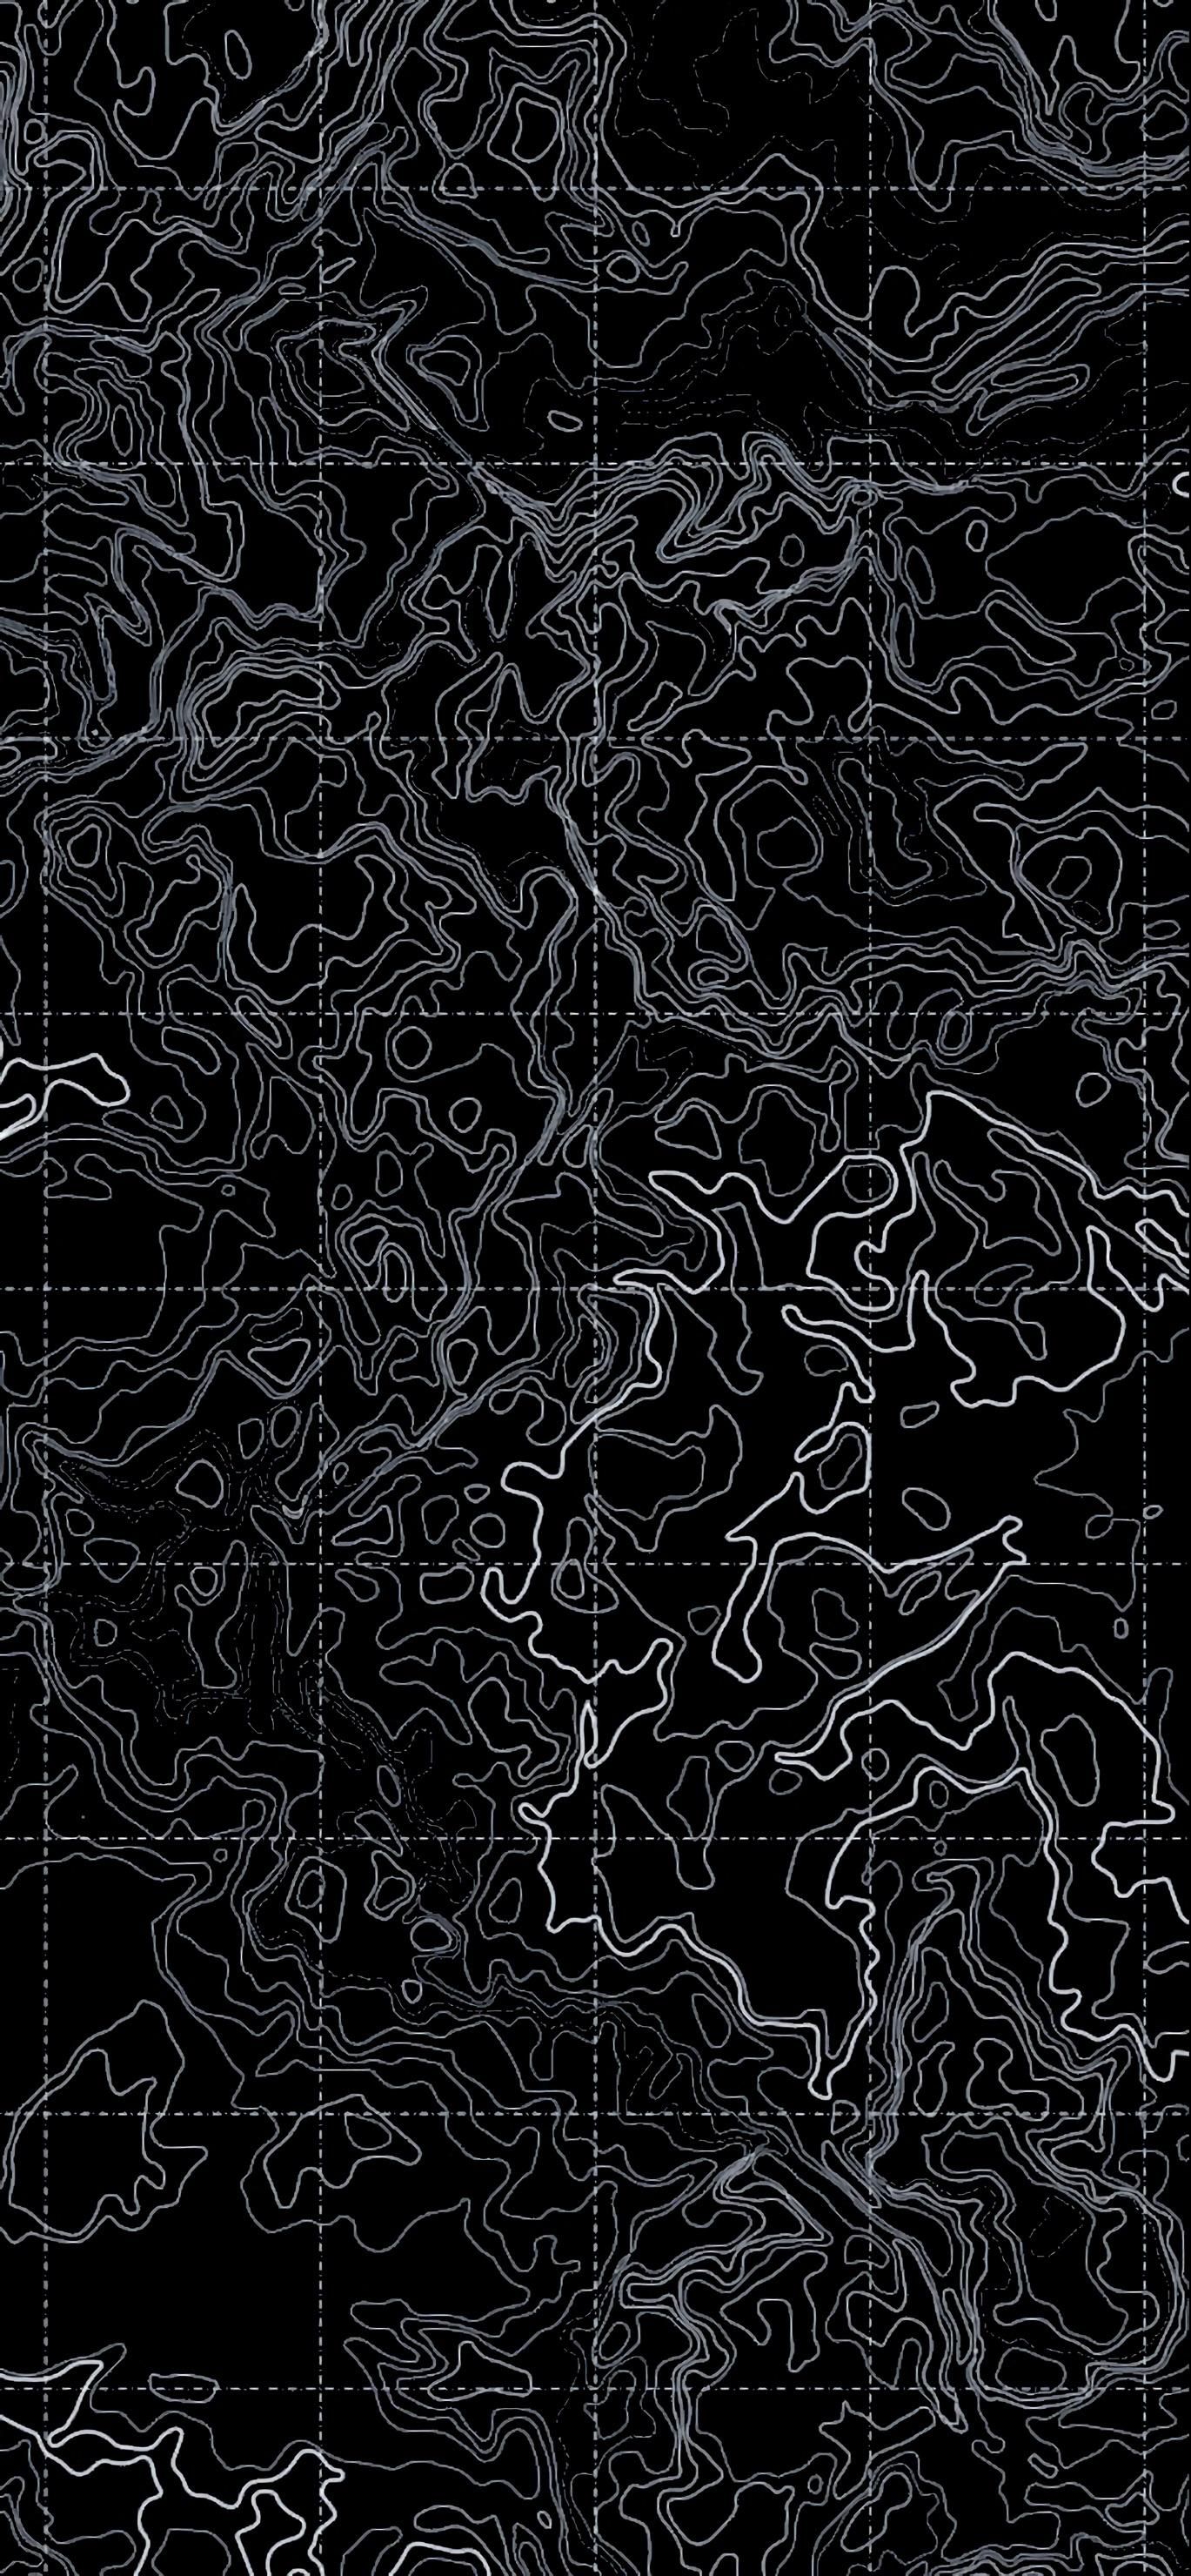 Topography. Cool wallpaper for phones